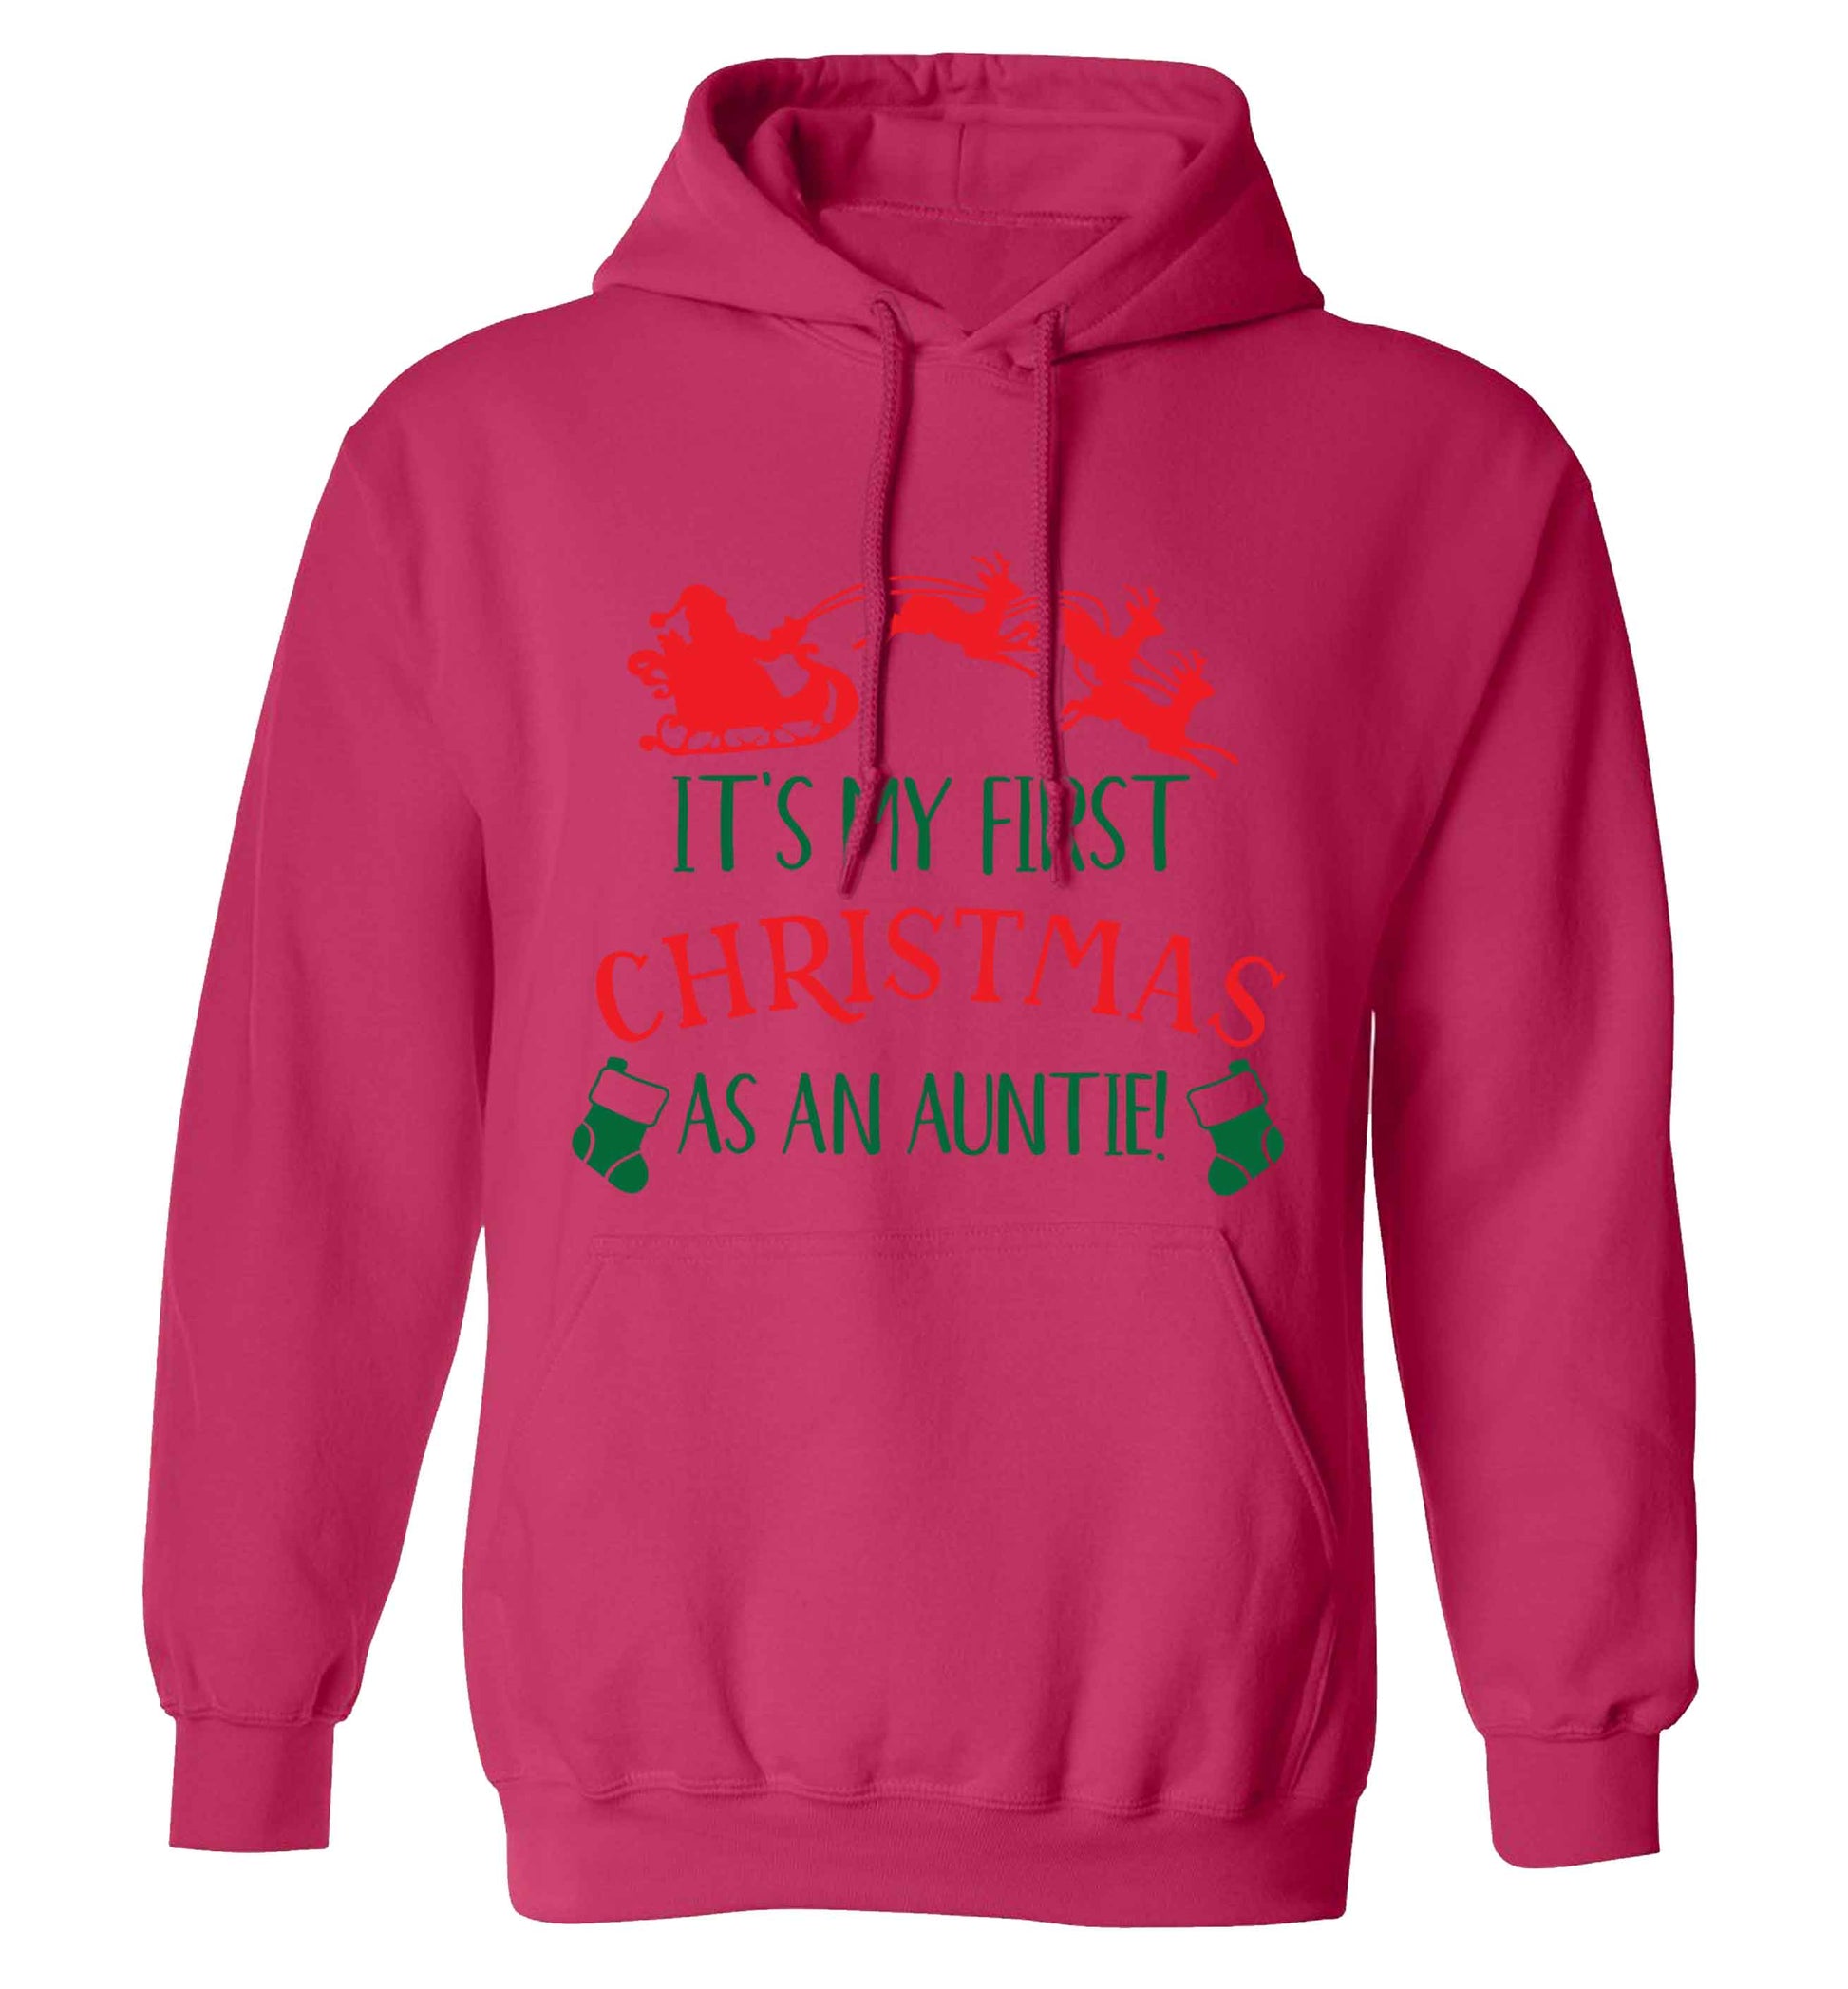 It's my first Christmas as an auntie! adults unisex pink hoodie 2XL